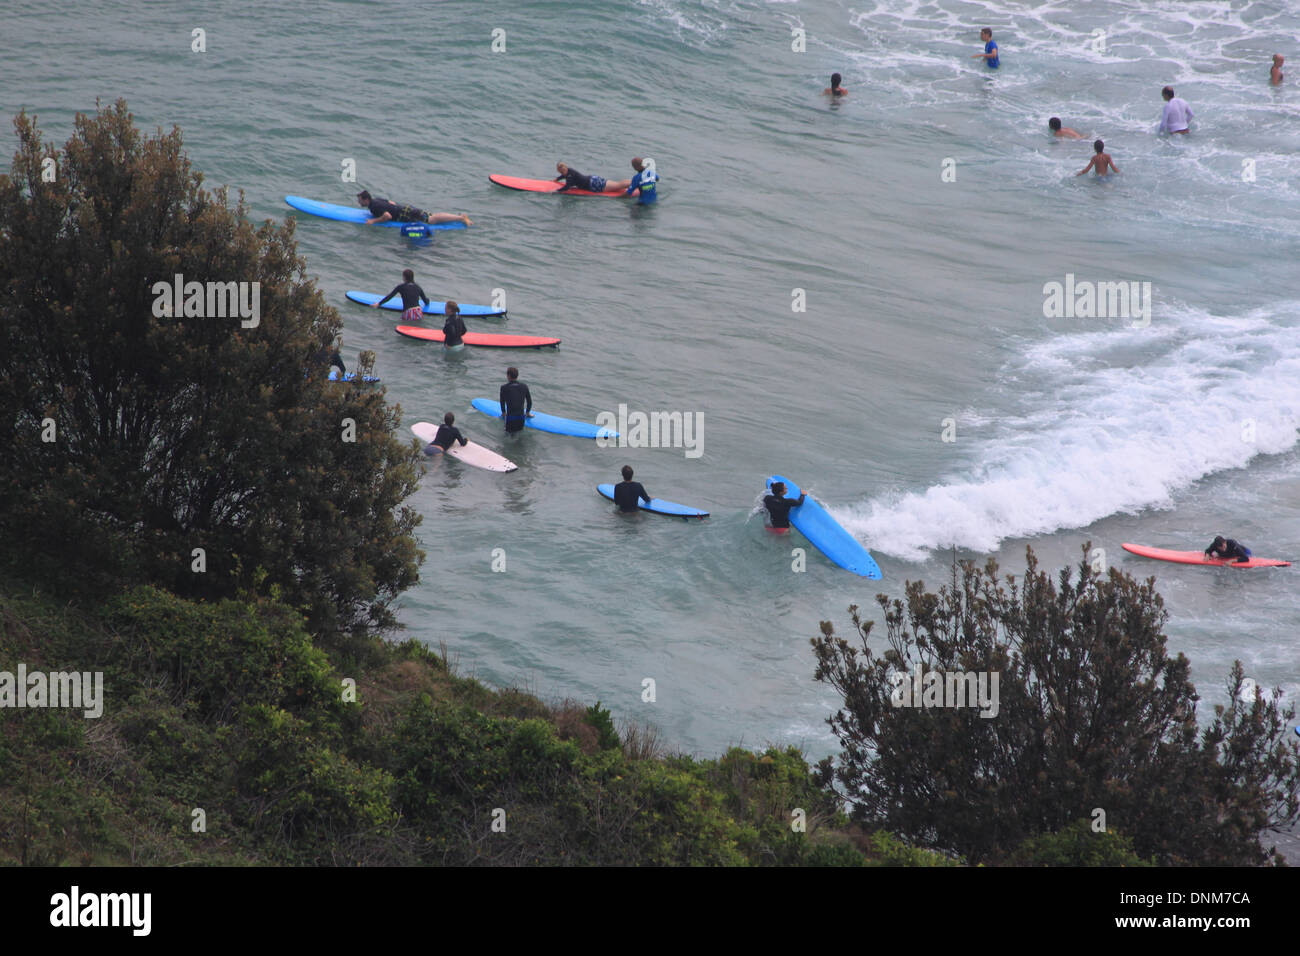 A photograph of a groups of surfers learning to surf at the beach in Australia. Stock Photo